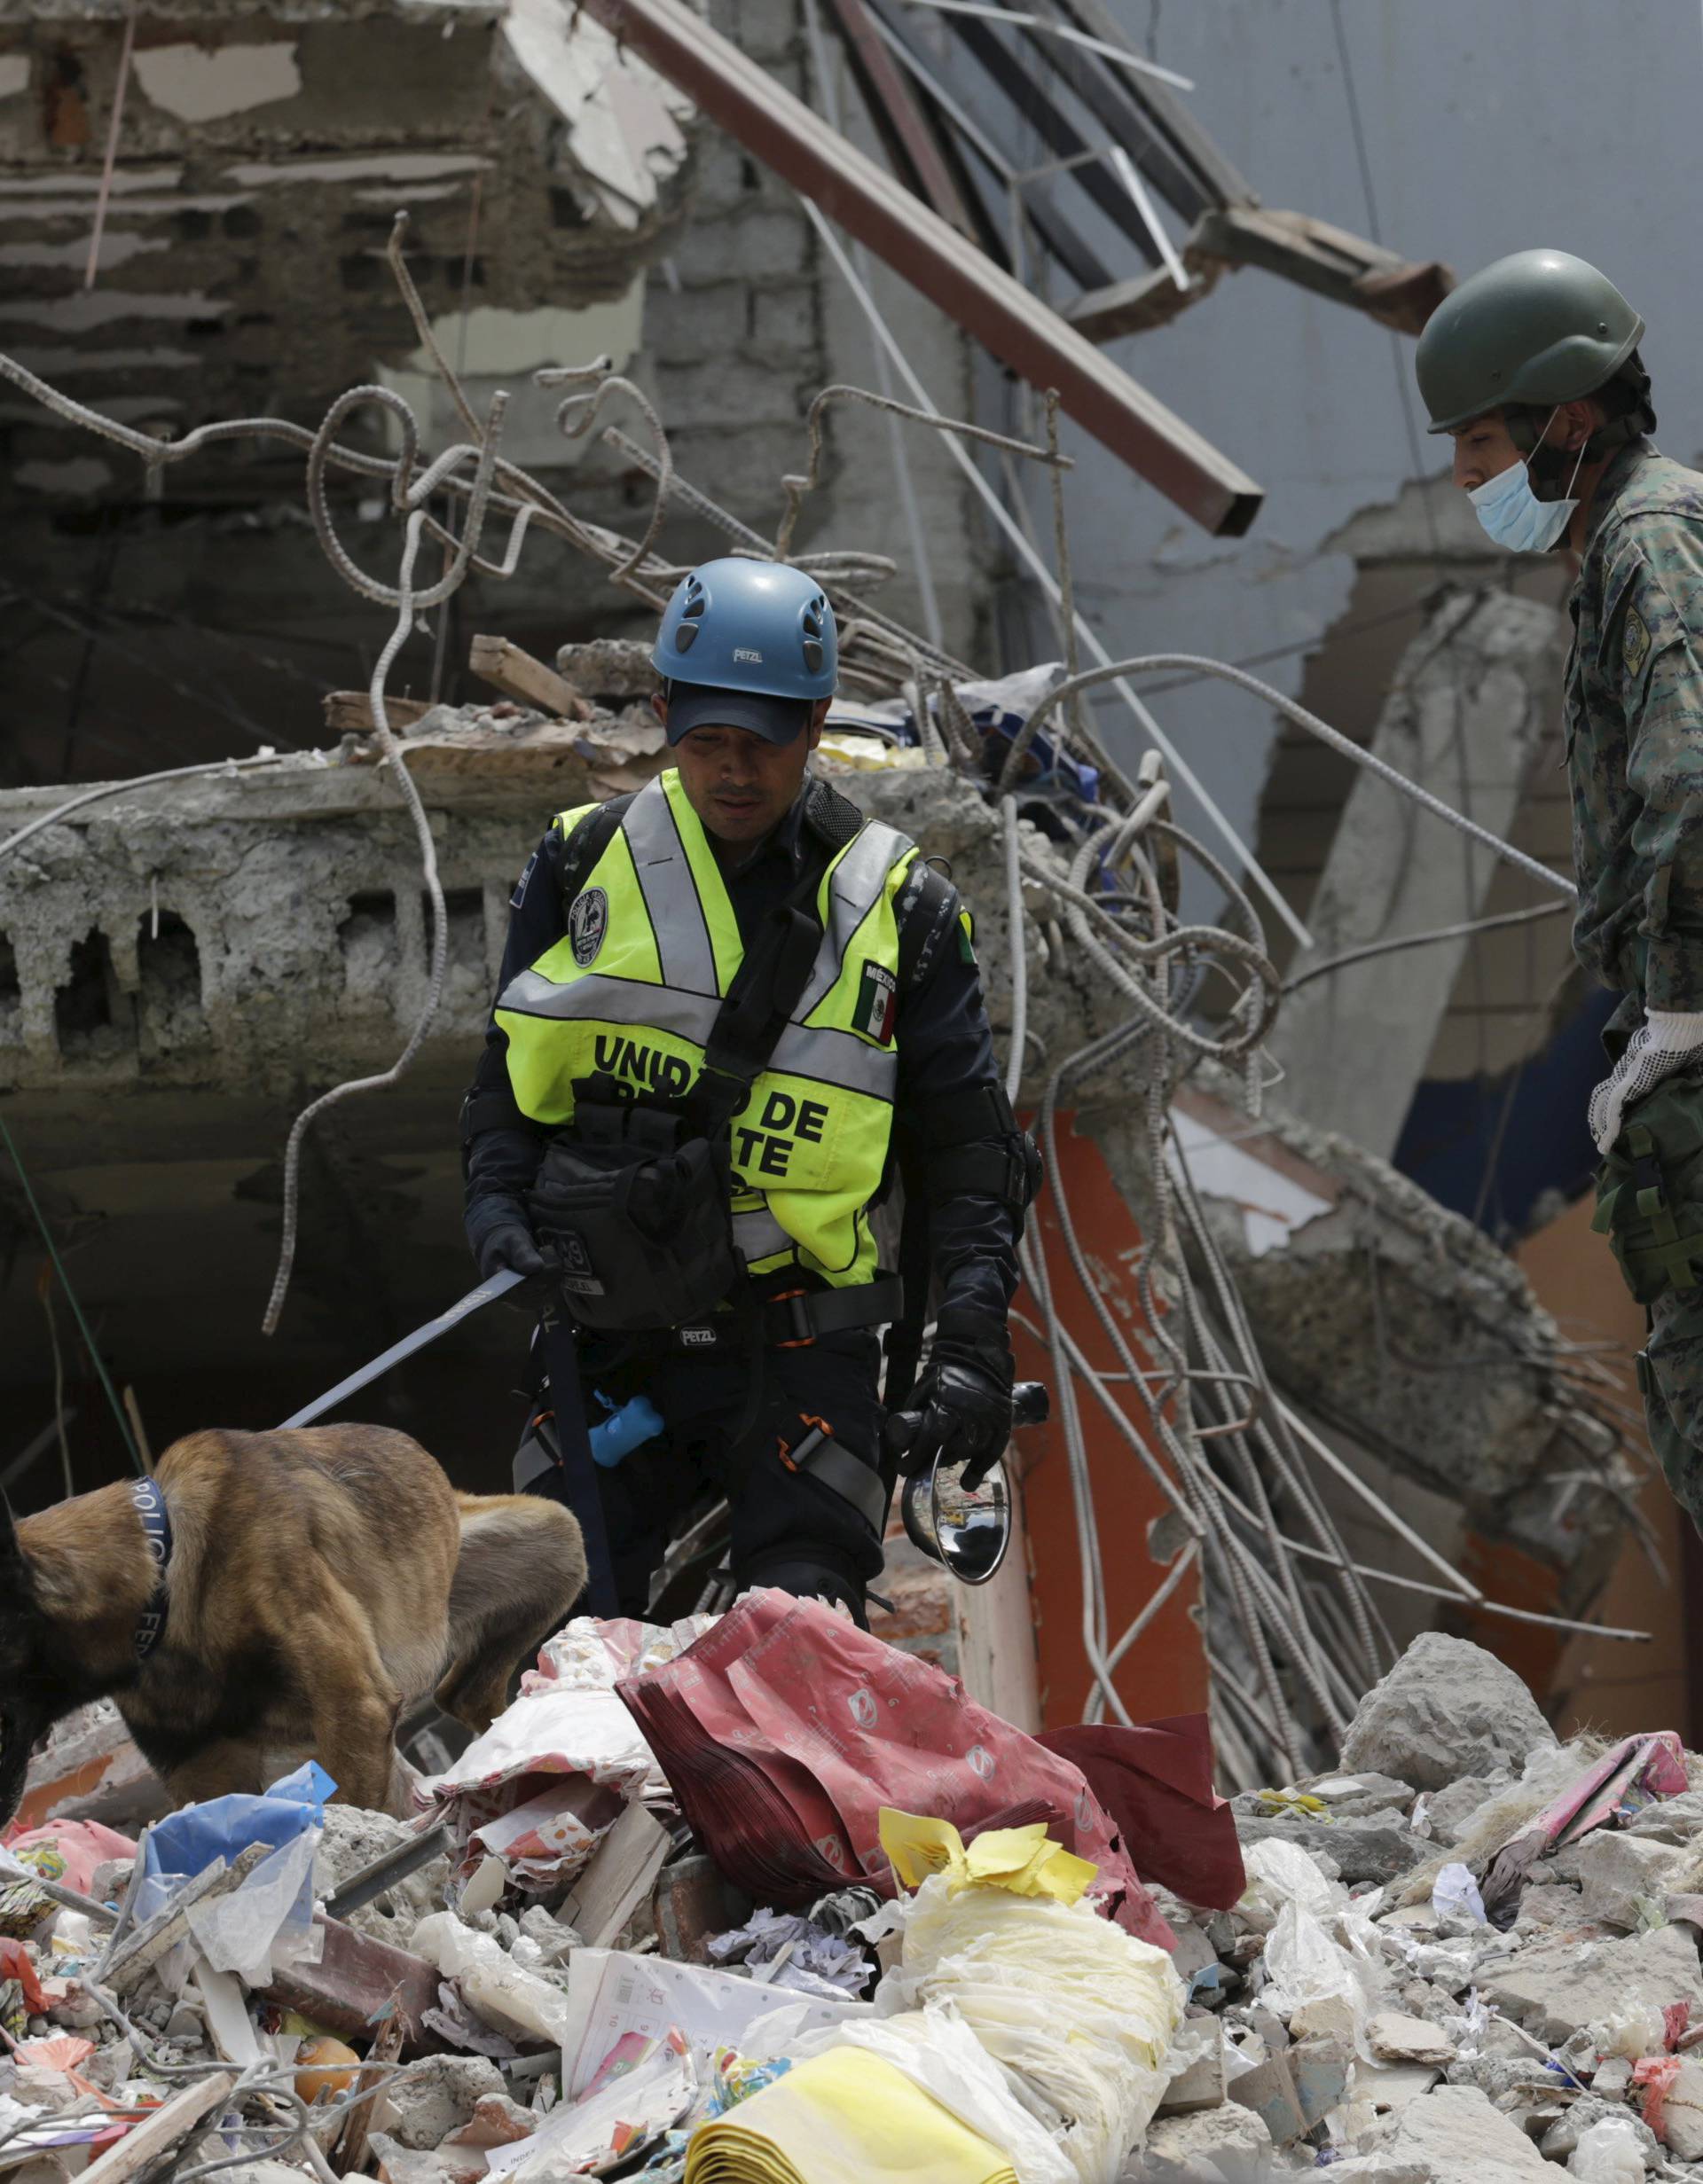 Mexico's Federal police officers and a Ecuadorean soldier search for victims amidst debris of collapsed buildings in Manta